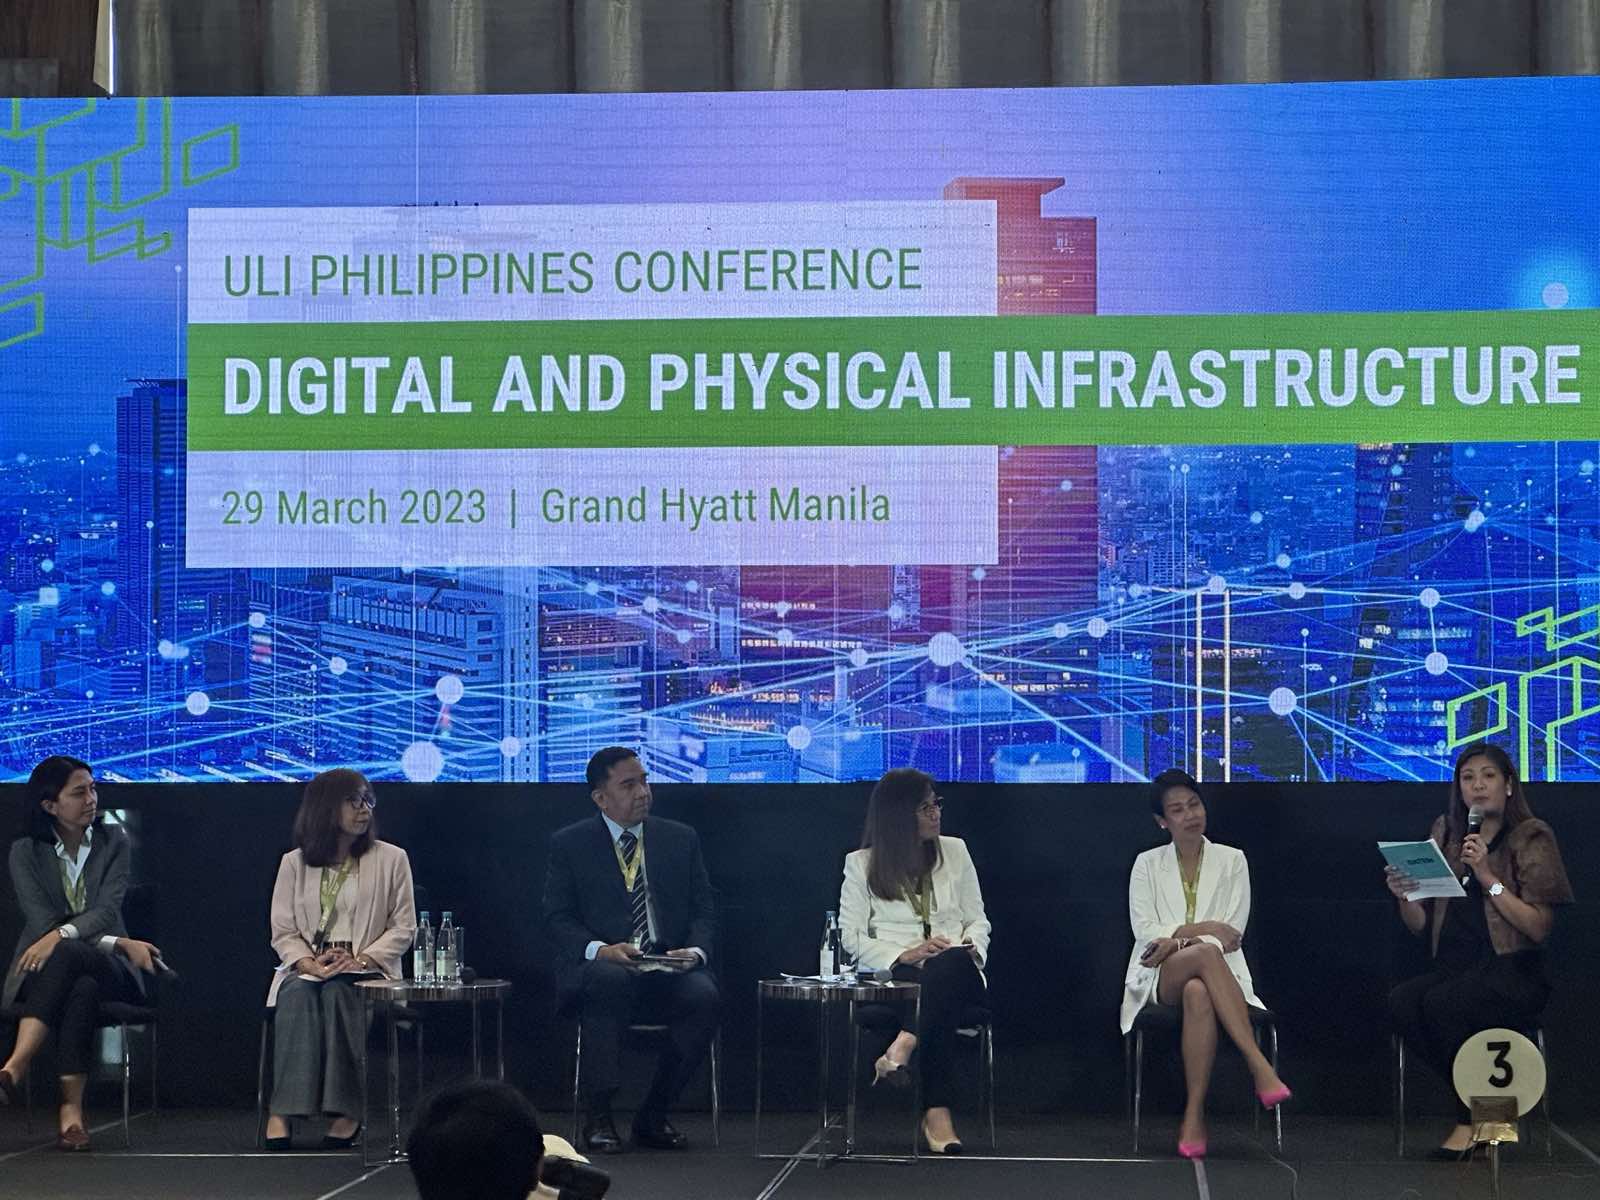 CIAP joins the 2023 ULI Philippines Conference